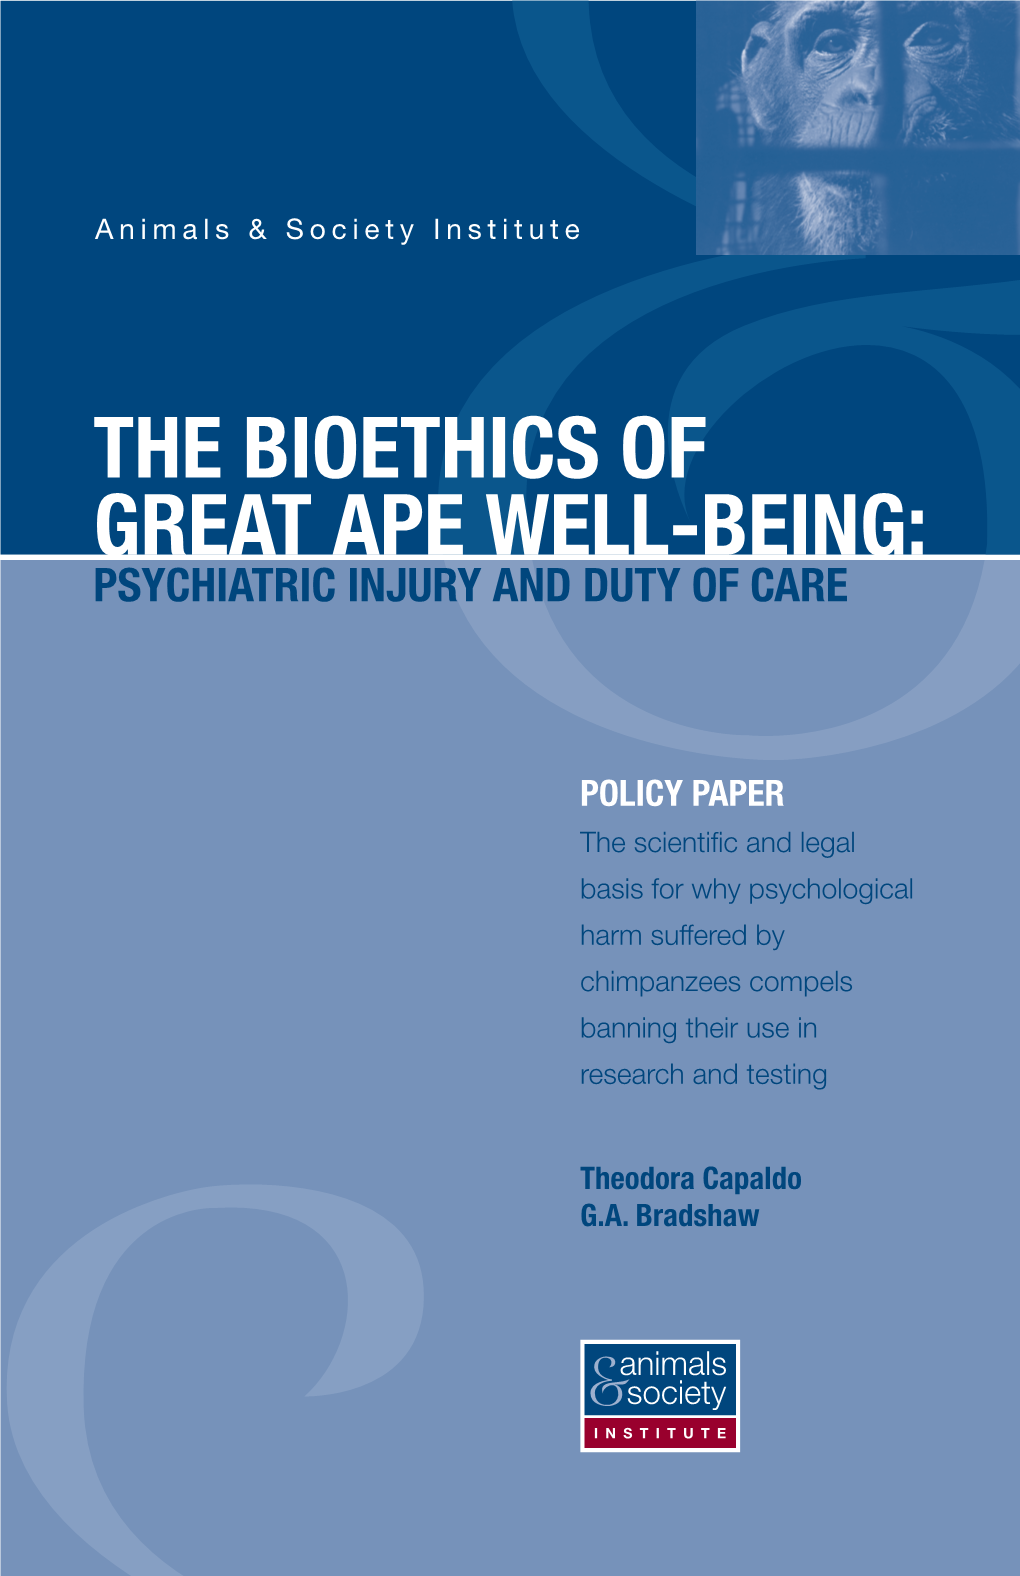 The Bioethics of Great Ape Well-Being: Psychiatric Injury and Duty of Care